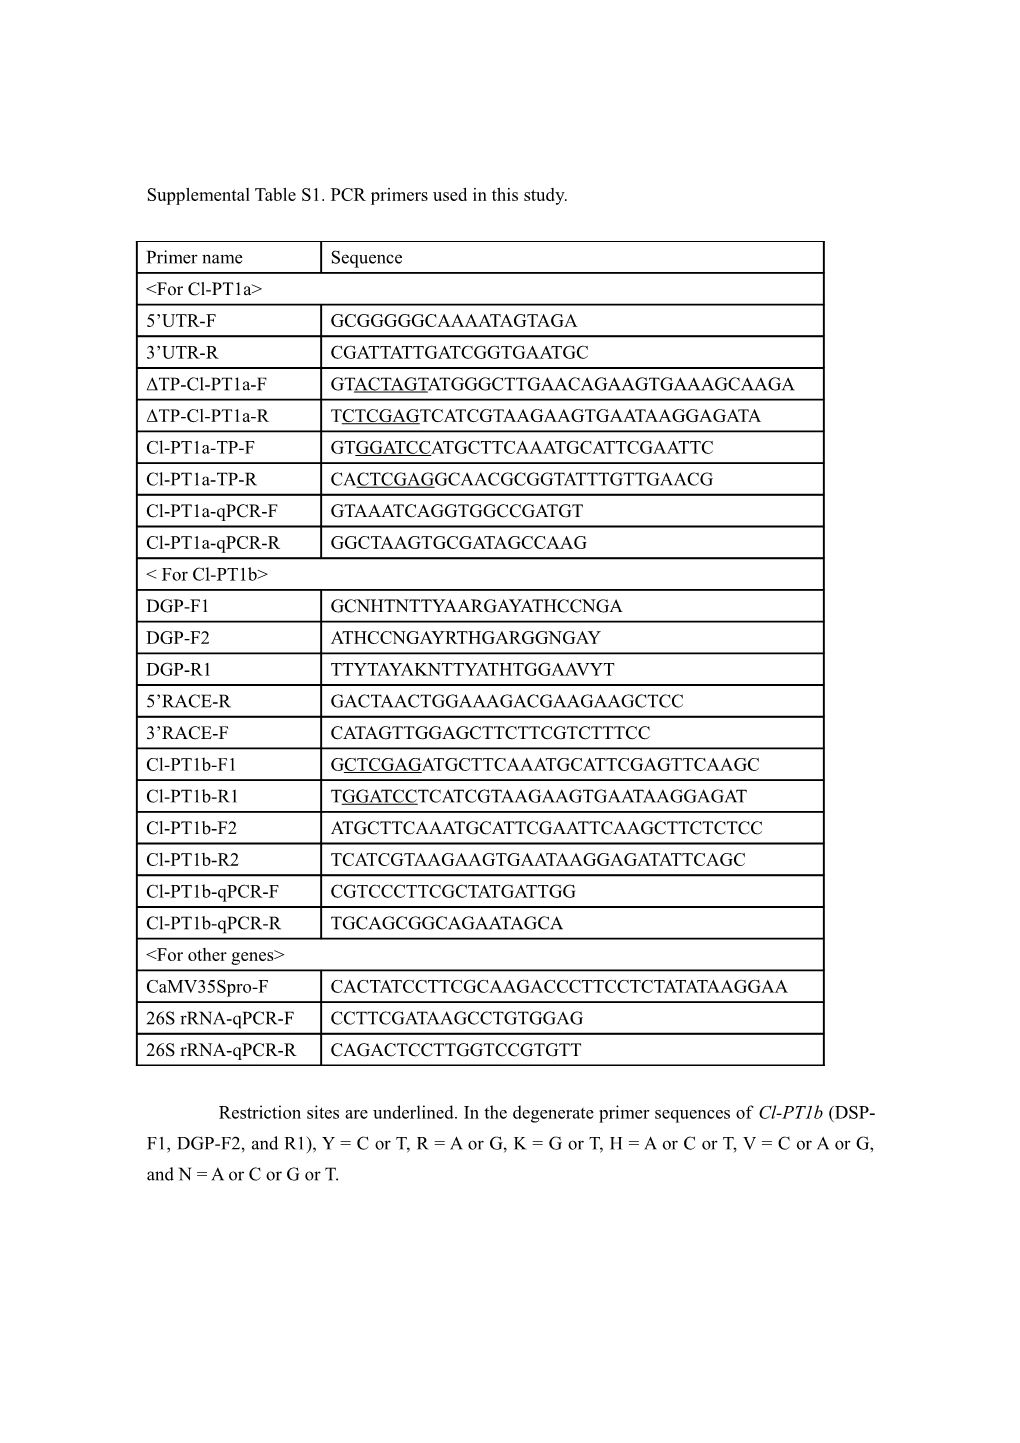 Supplemental Table S1. PCR Primers Used in This Study